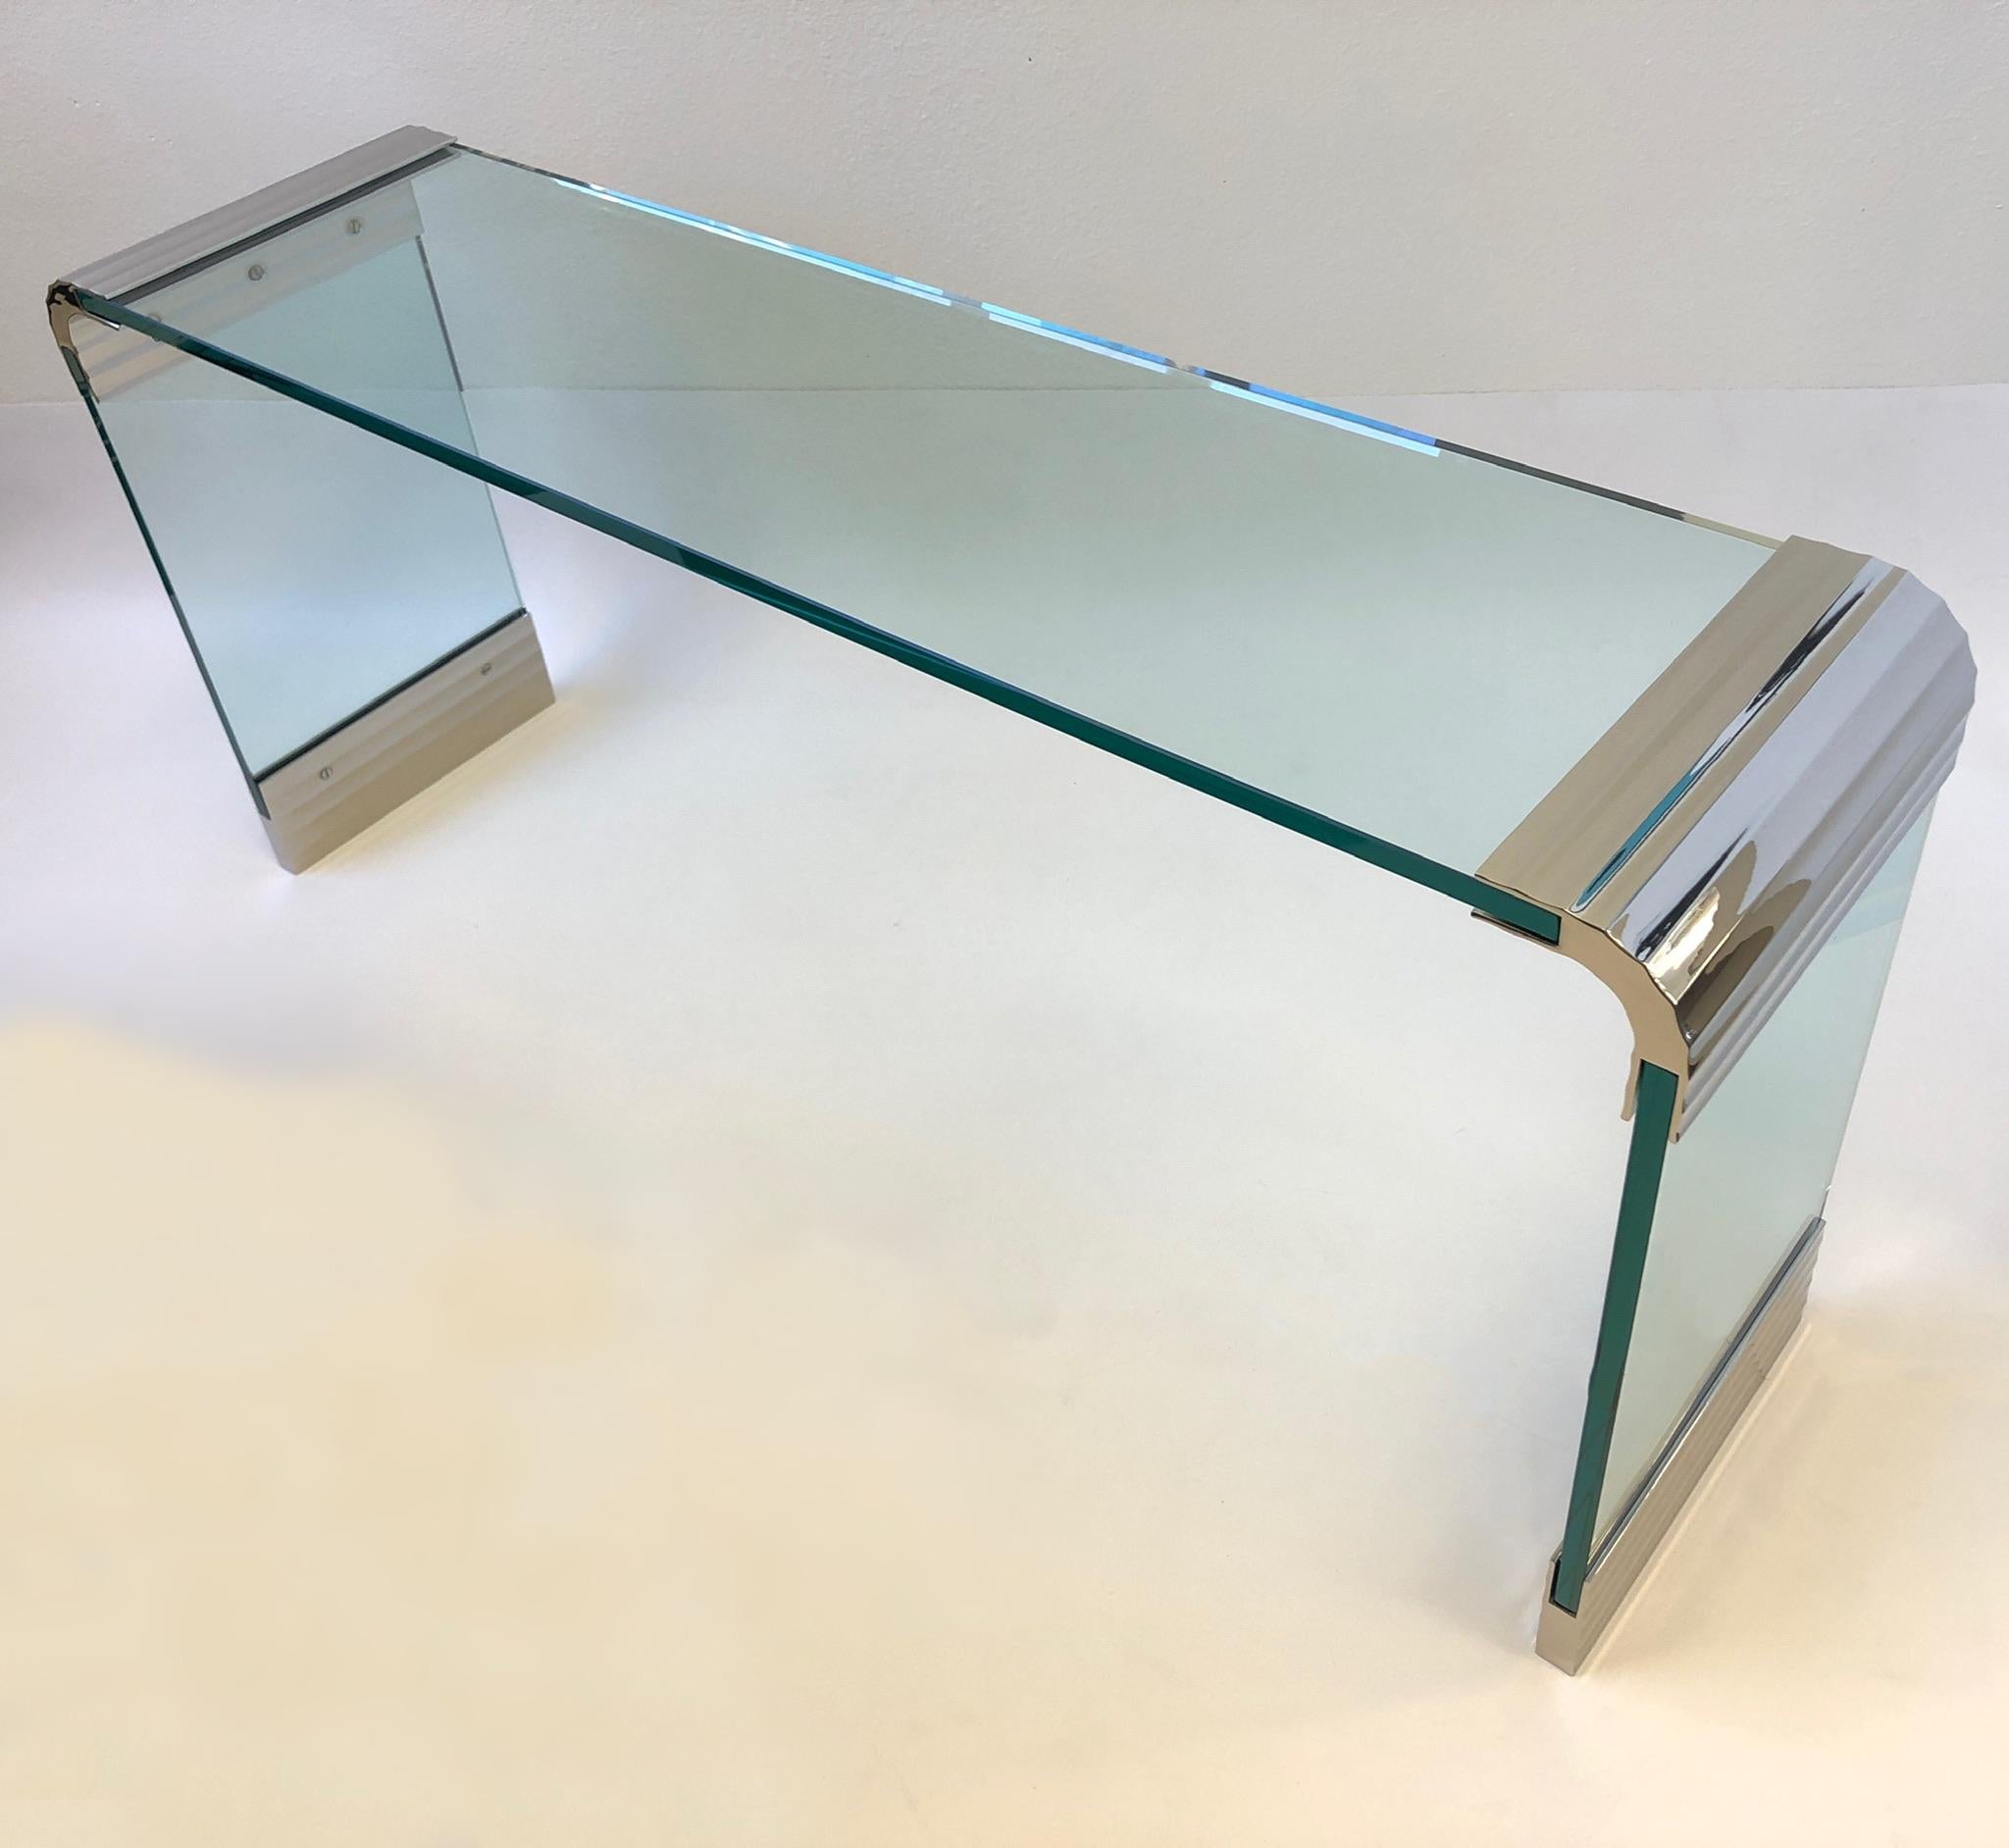 American Scalloped Nickel and Glass Waterfall Console Table by Leon Rosen for Pace